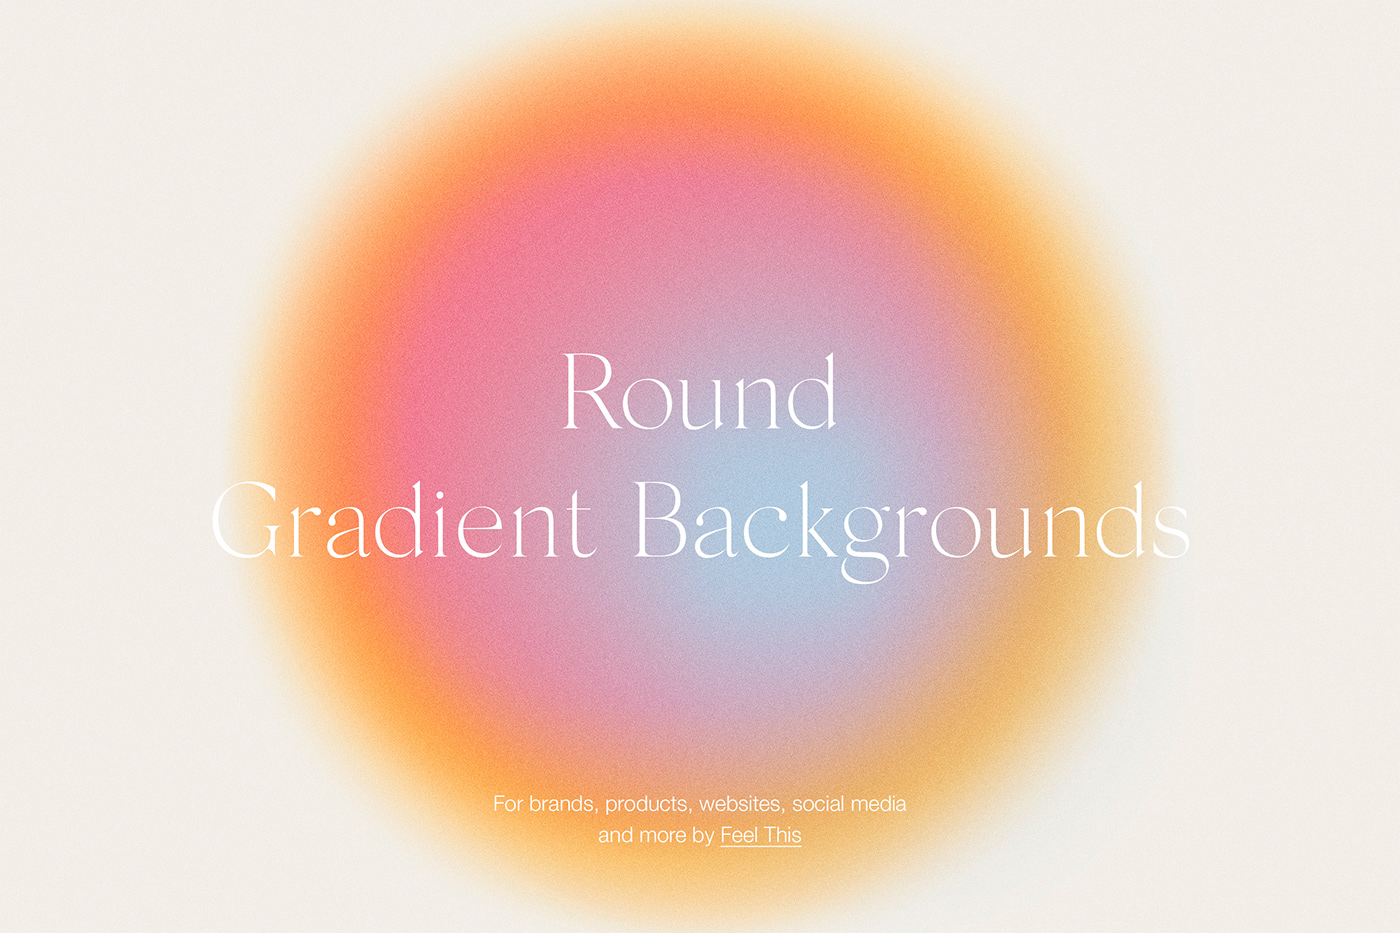 abstract aesthetic backgrounds colorful download now gradients Patterns png psd jpg Round Circle textures